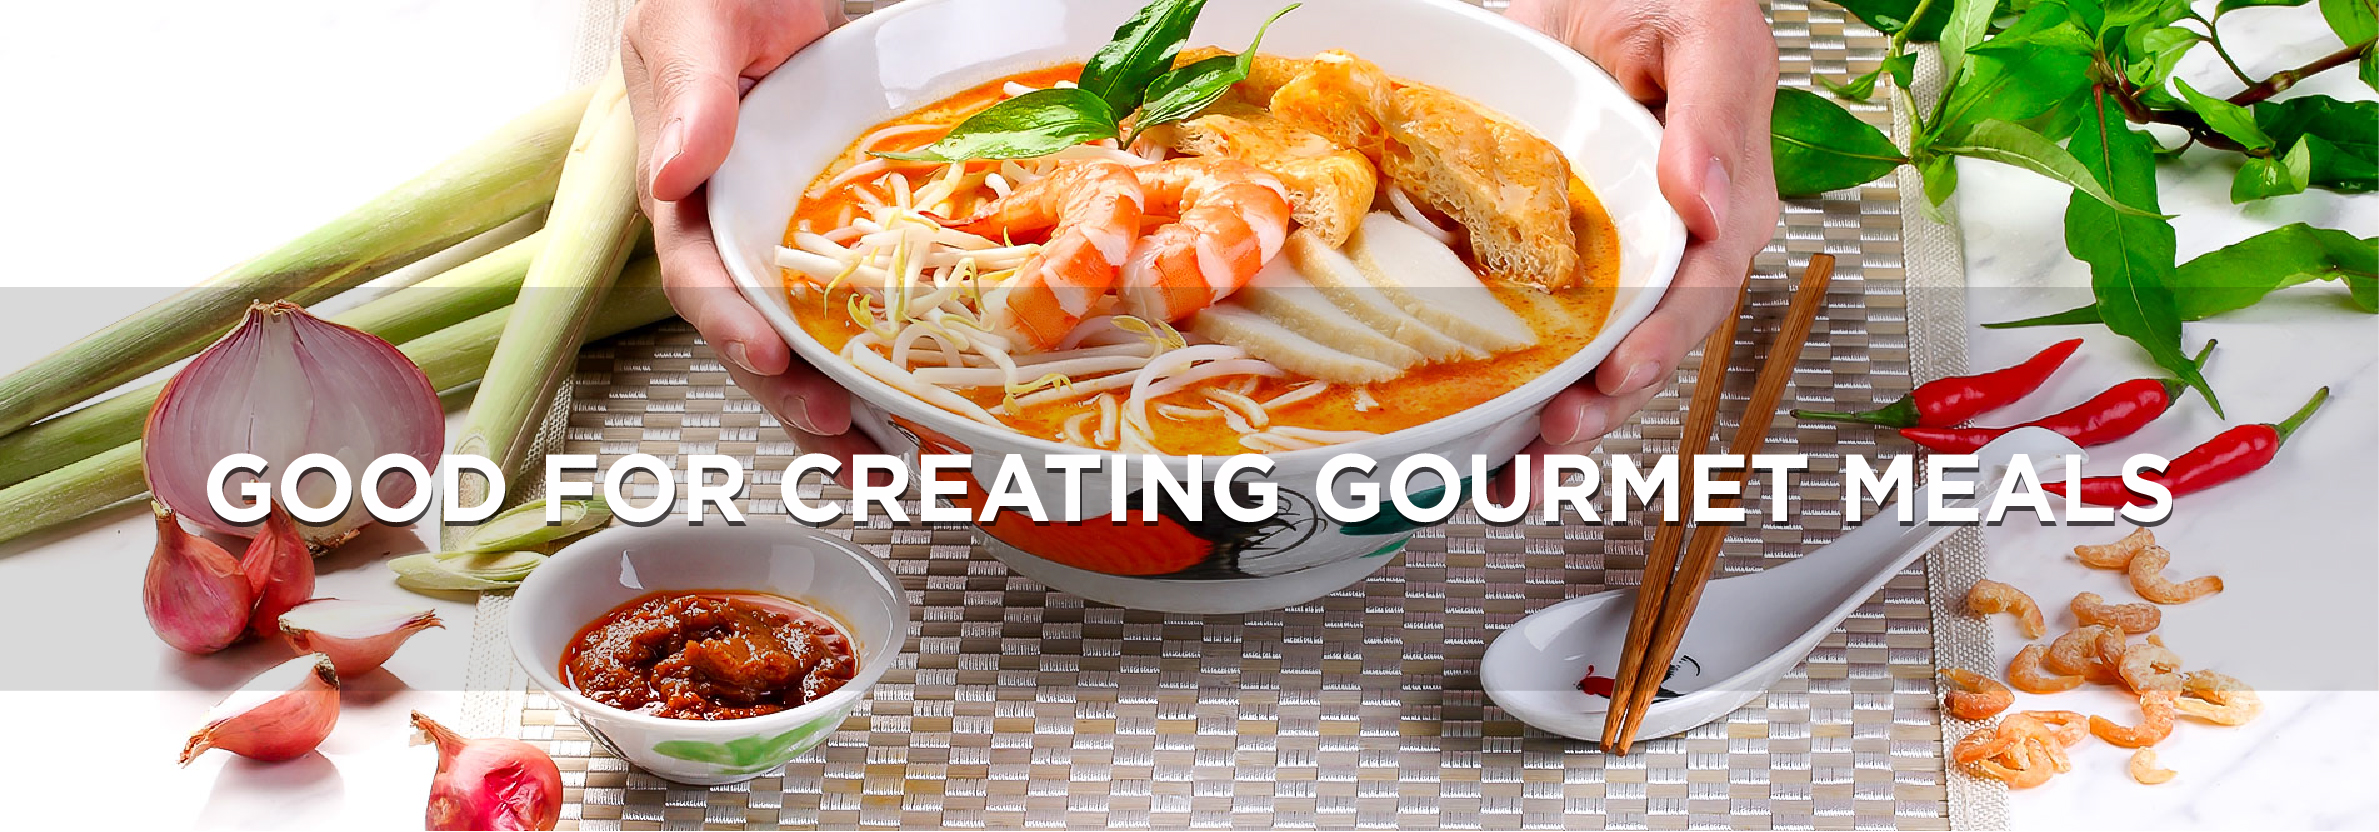 LaMian for gourmet meals